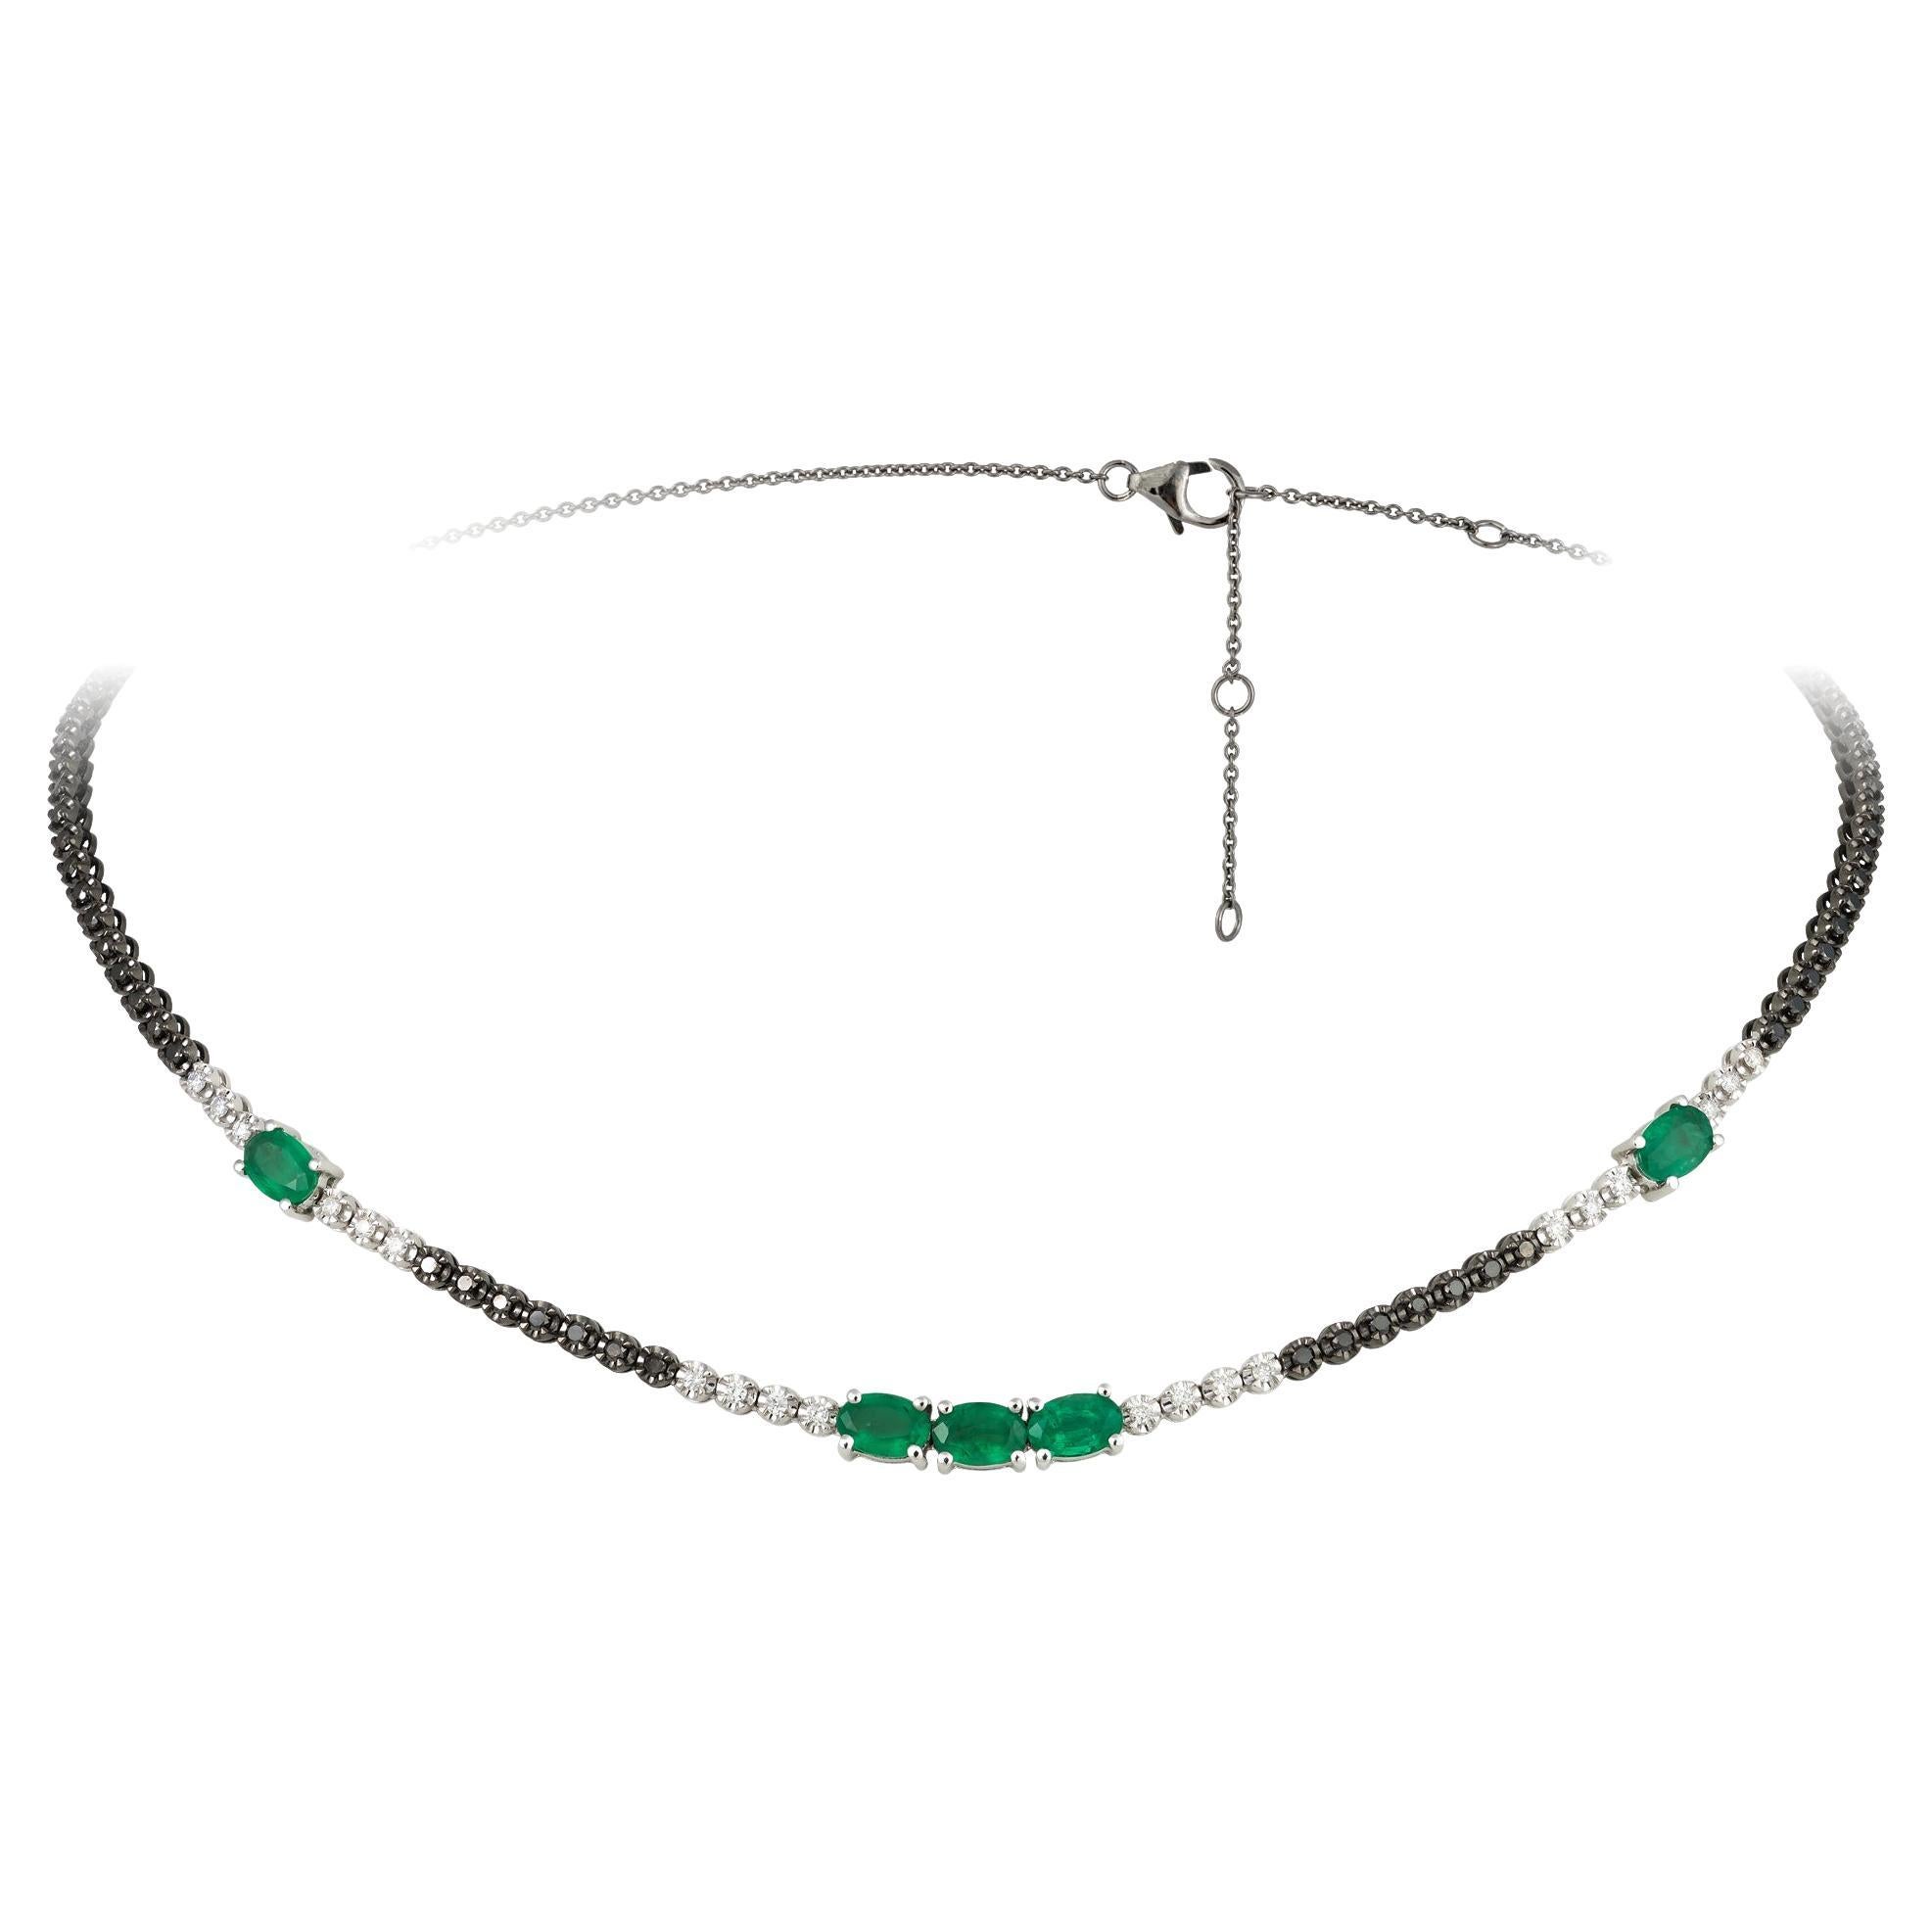 Fashion White Gold 18K Necklace Emerald Black Diamond for Her For Sale